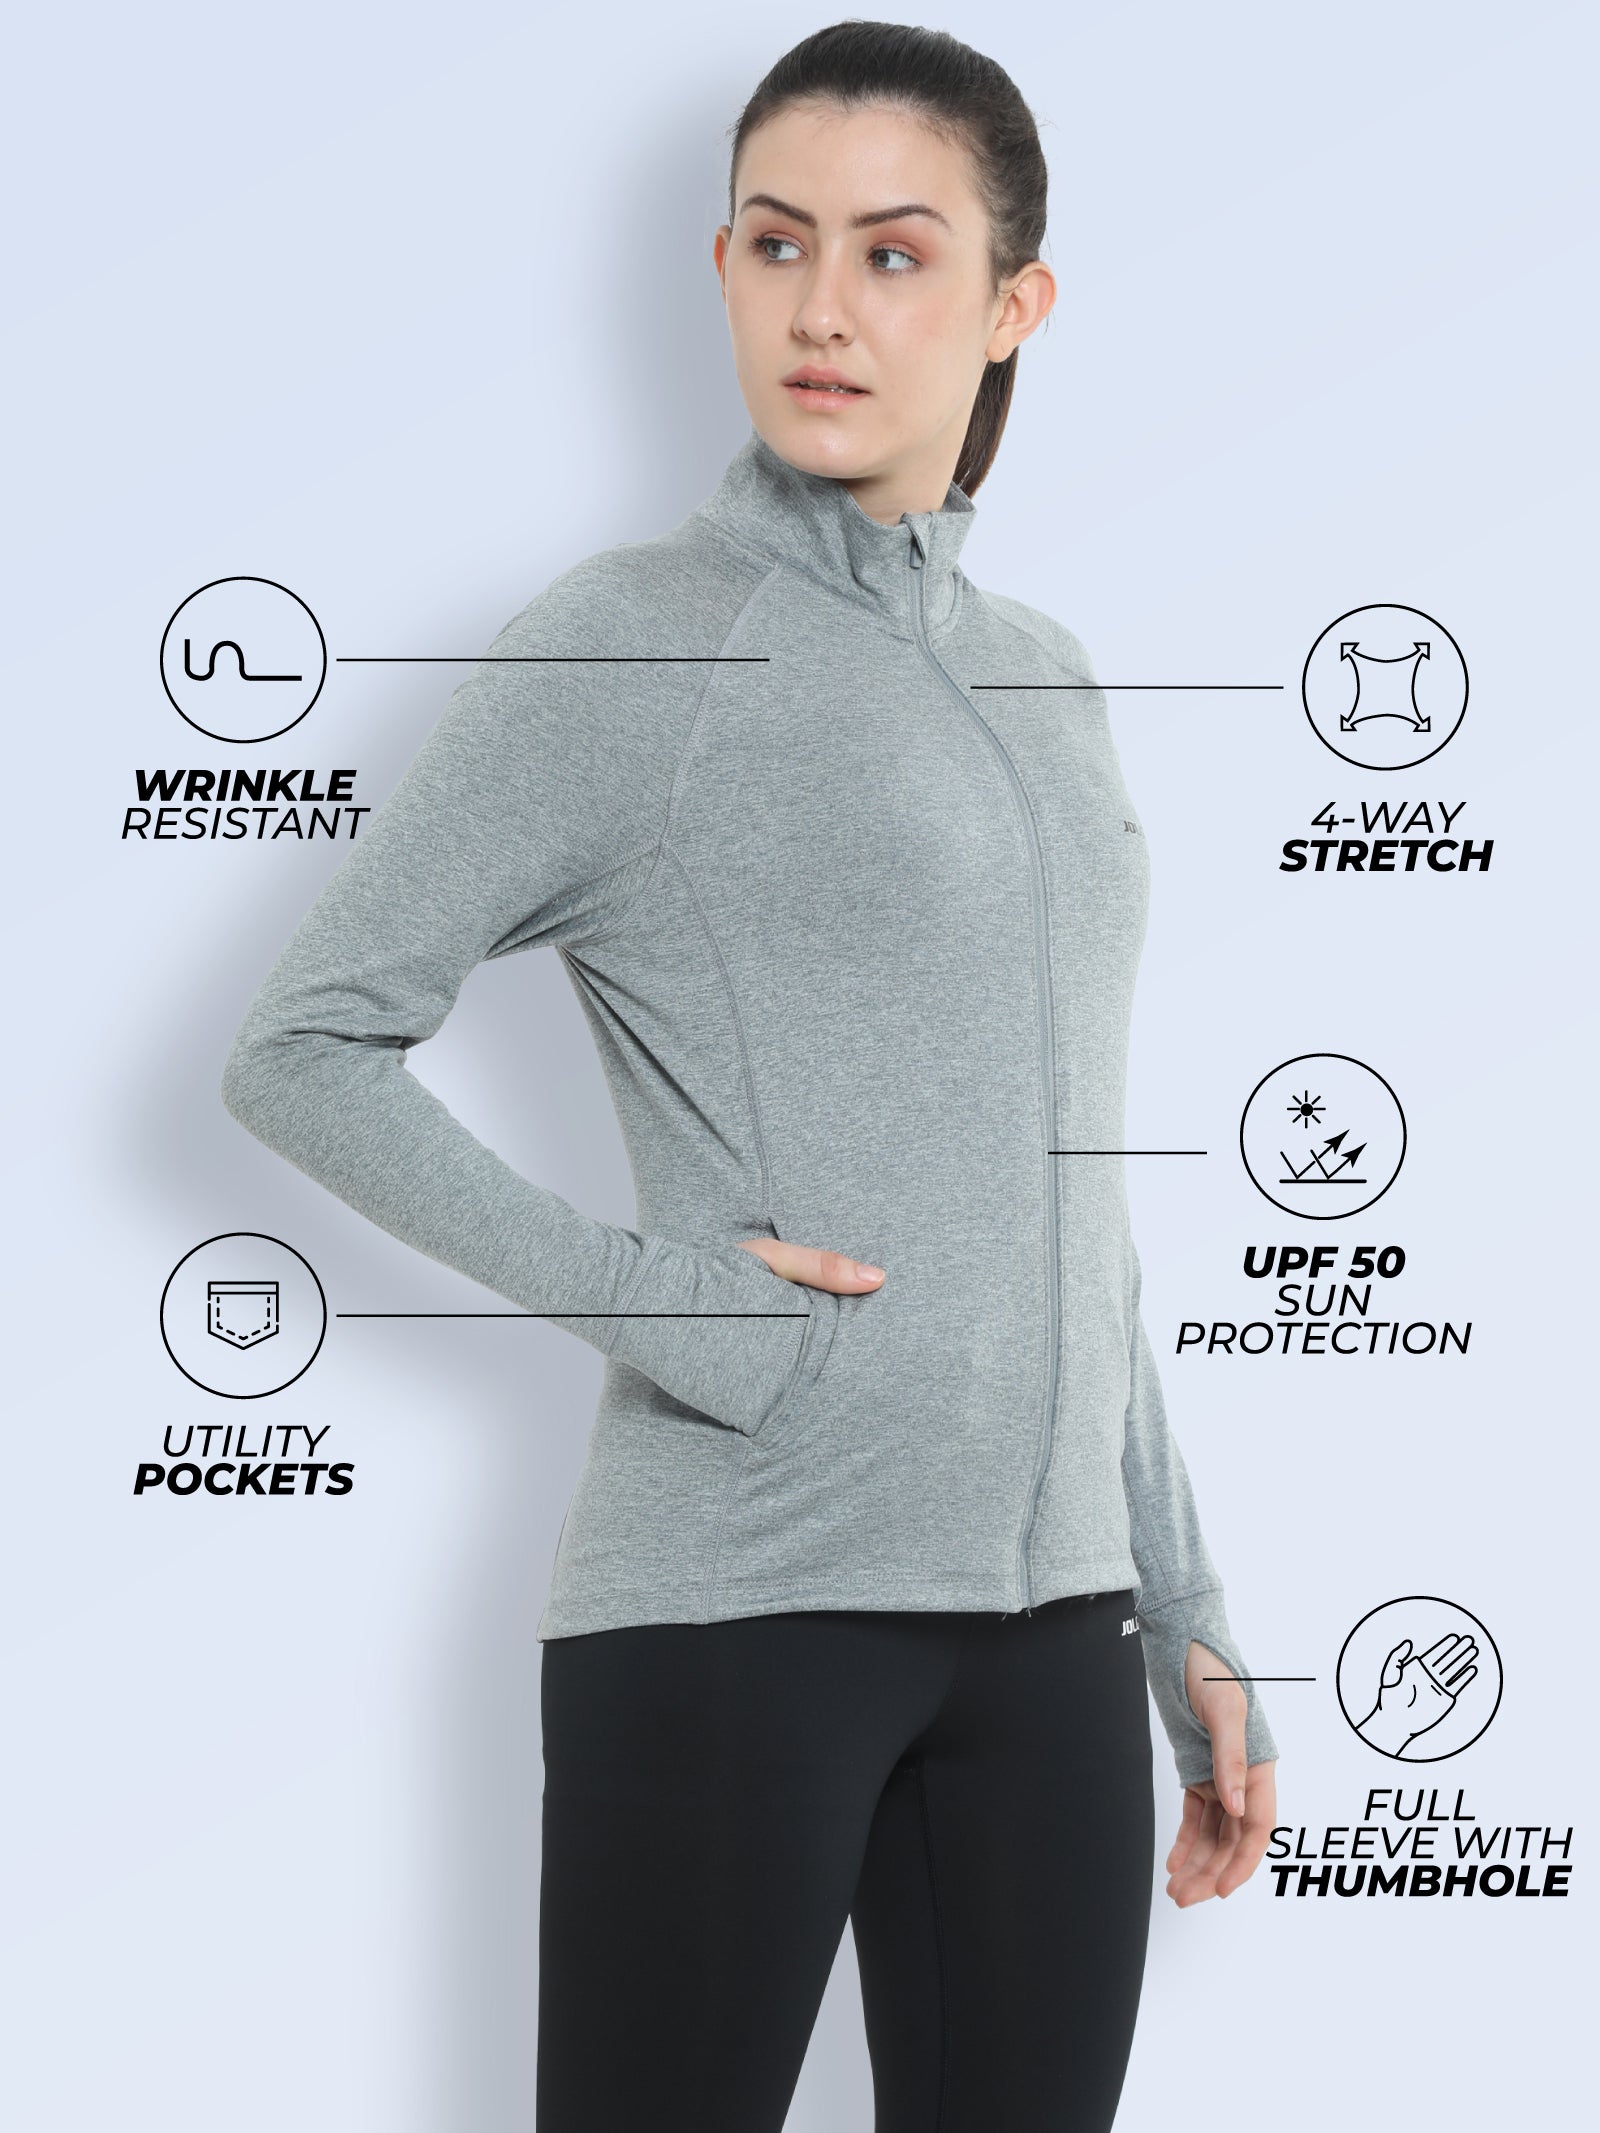 Gym & Sports Jacket For Women - Grey Color